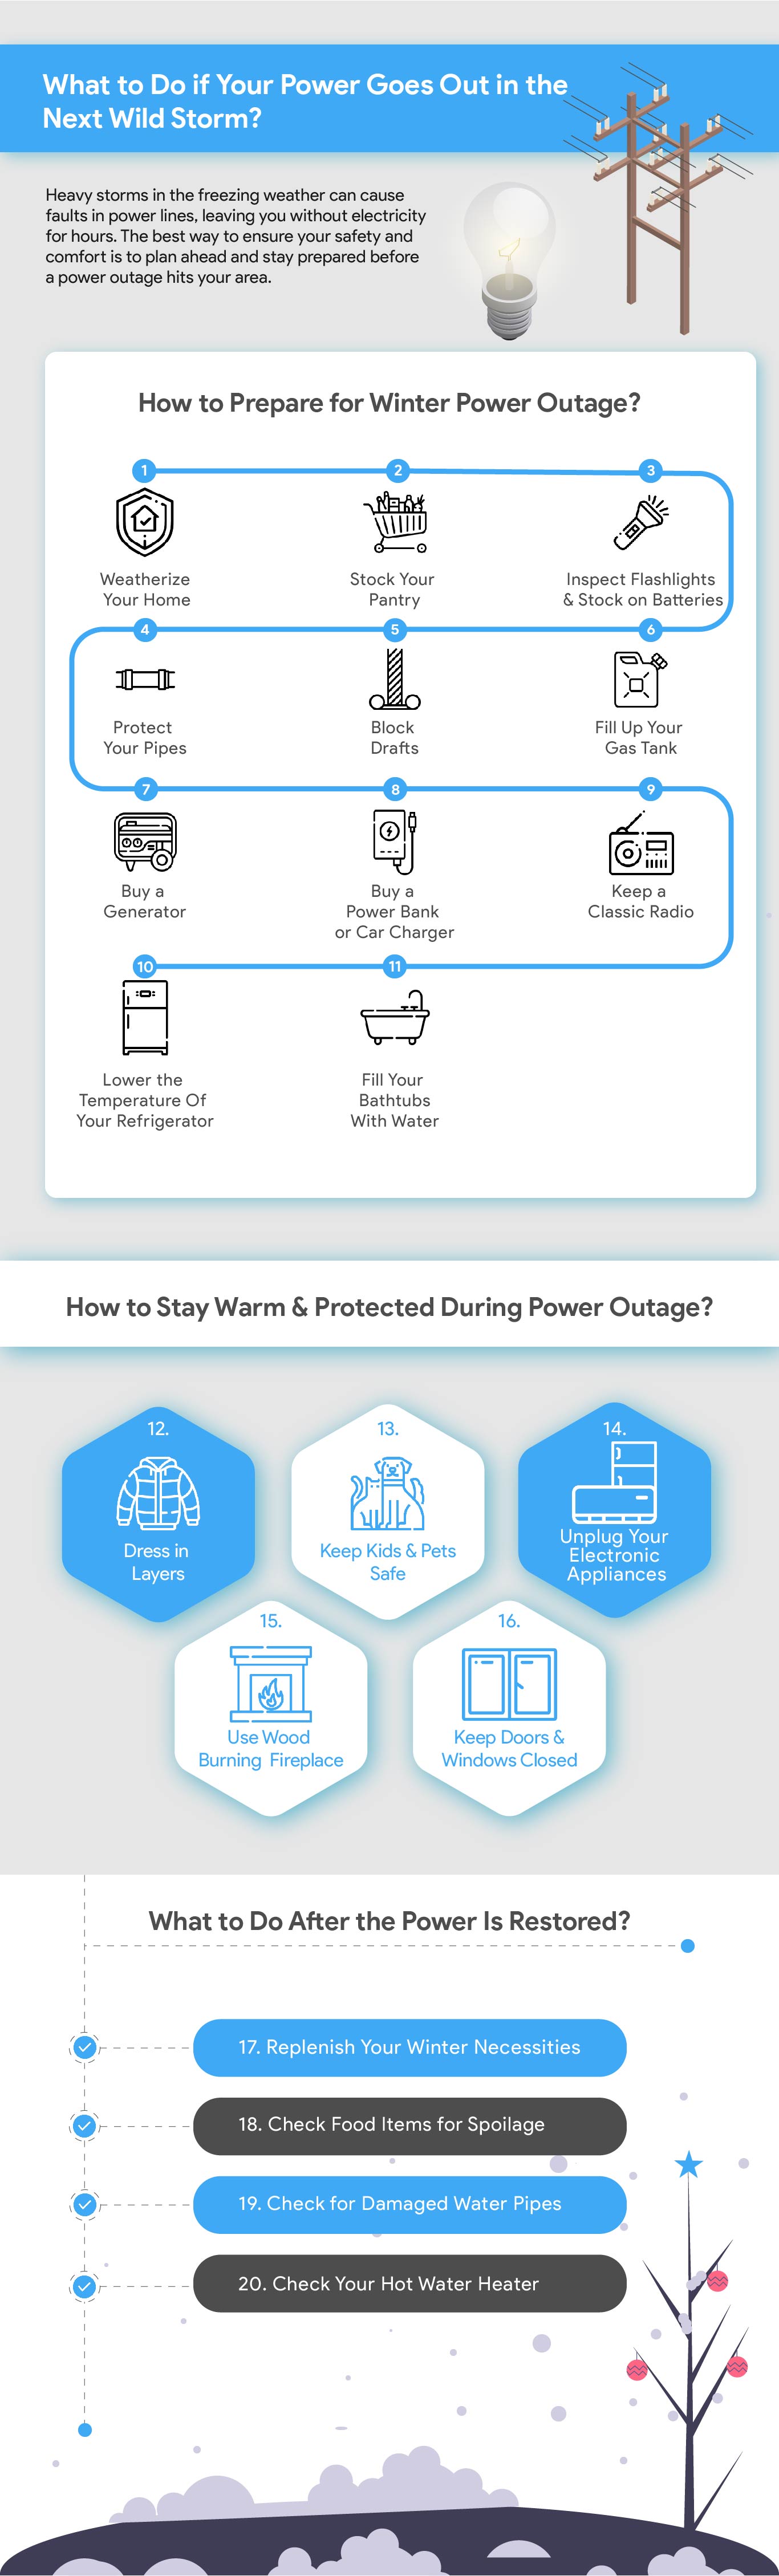 https://cielowigle.com/wp-content/uploads/2021/12/winter-power-outage-infographic.jpg